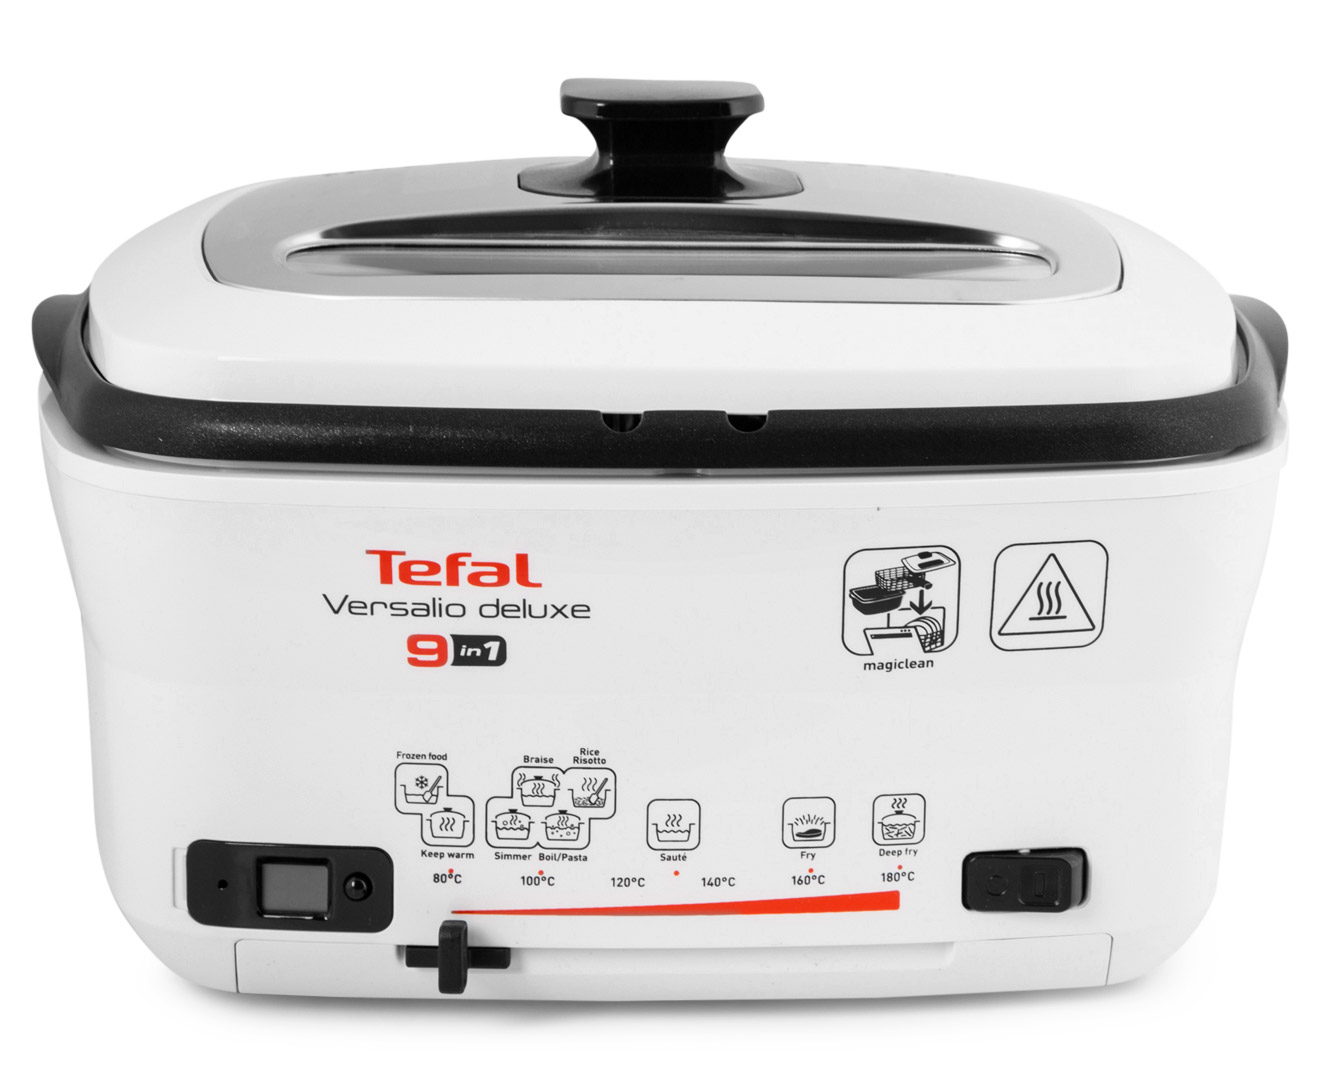 Tefal Versalio Deluxe 9-In-1 FR4950 Multi Cooker - White ... from s.catch.c...